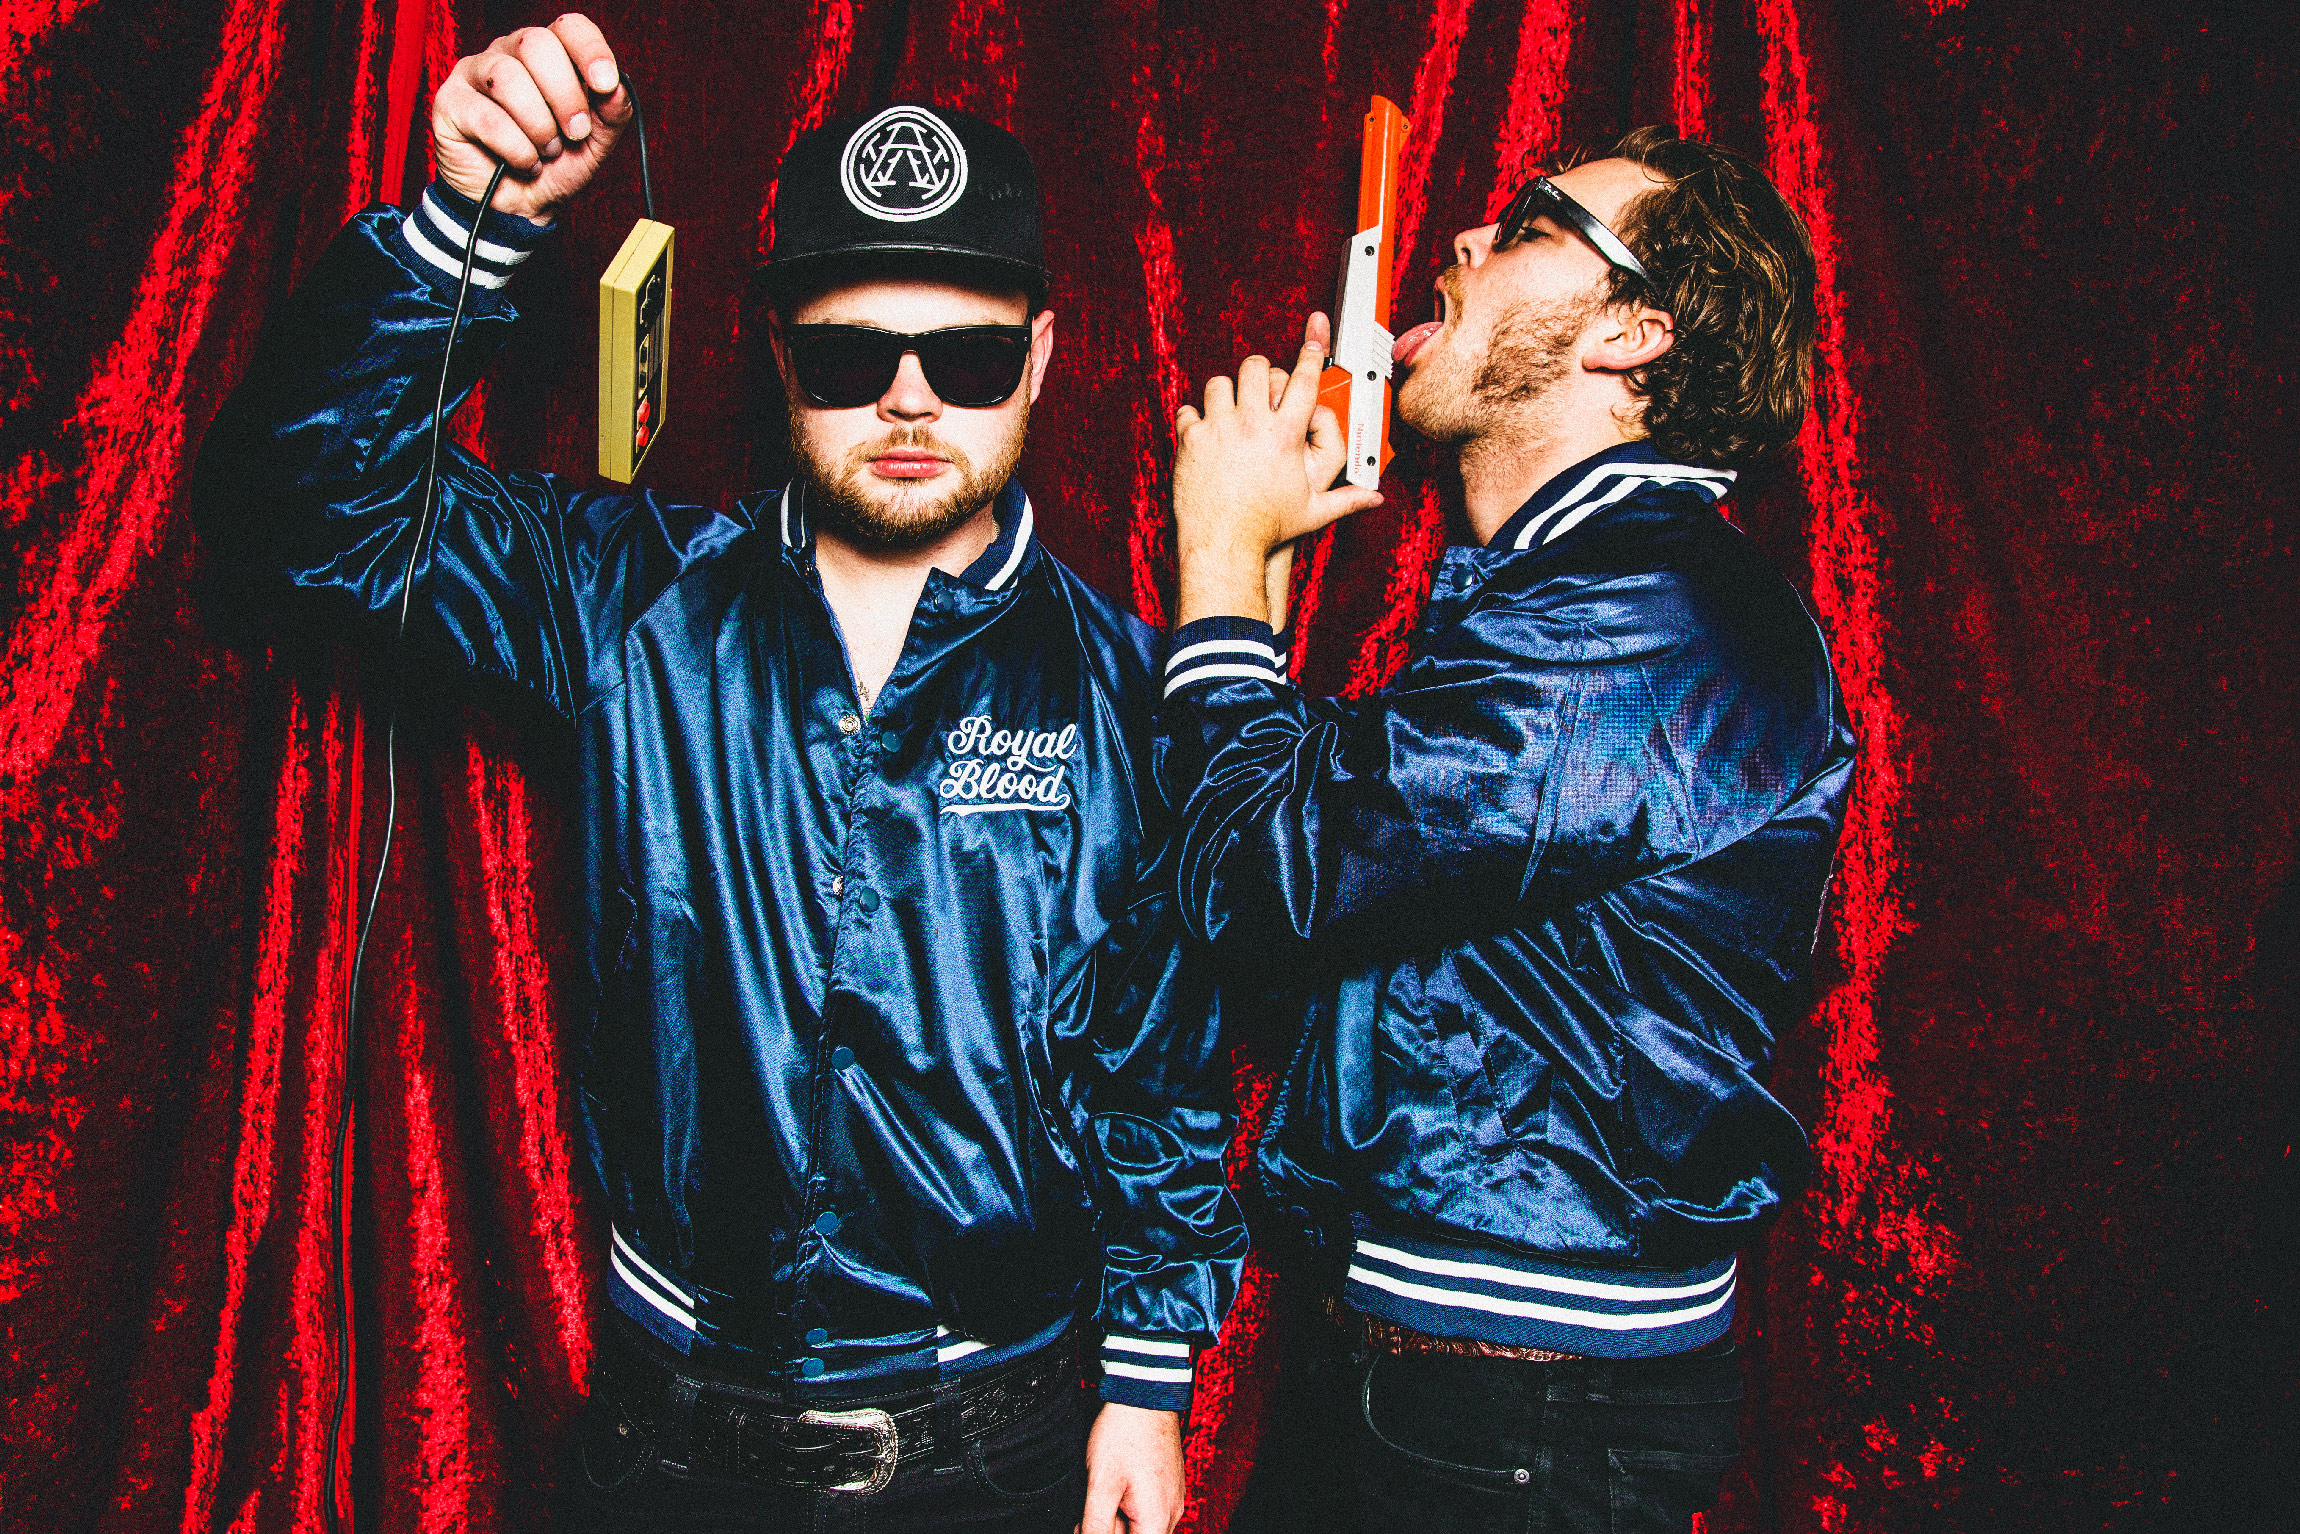 HD desktop wallpaper featuring two members of Royal Blood in stylish jackets against a red velvet background, exuding a cool and edgy vibe.